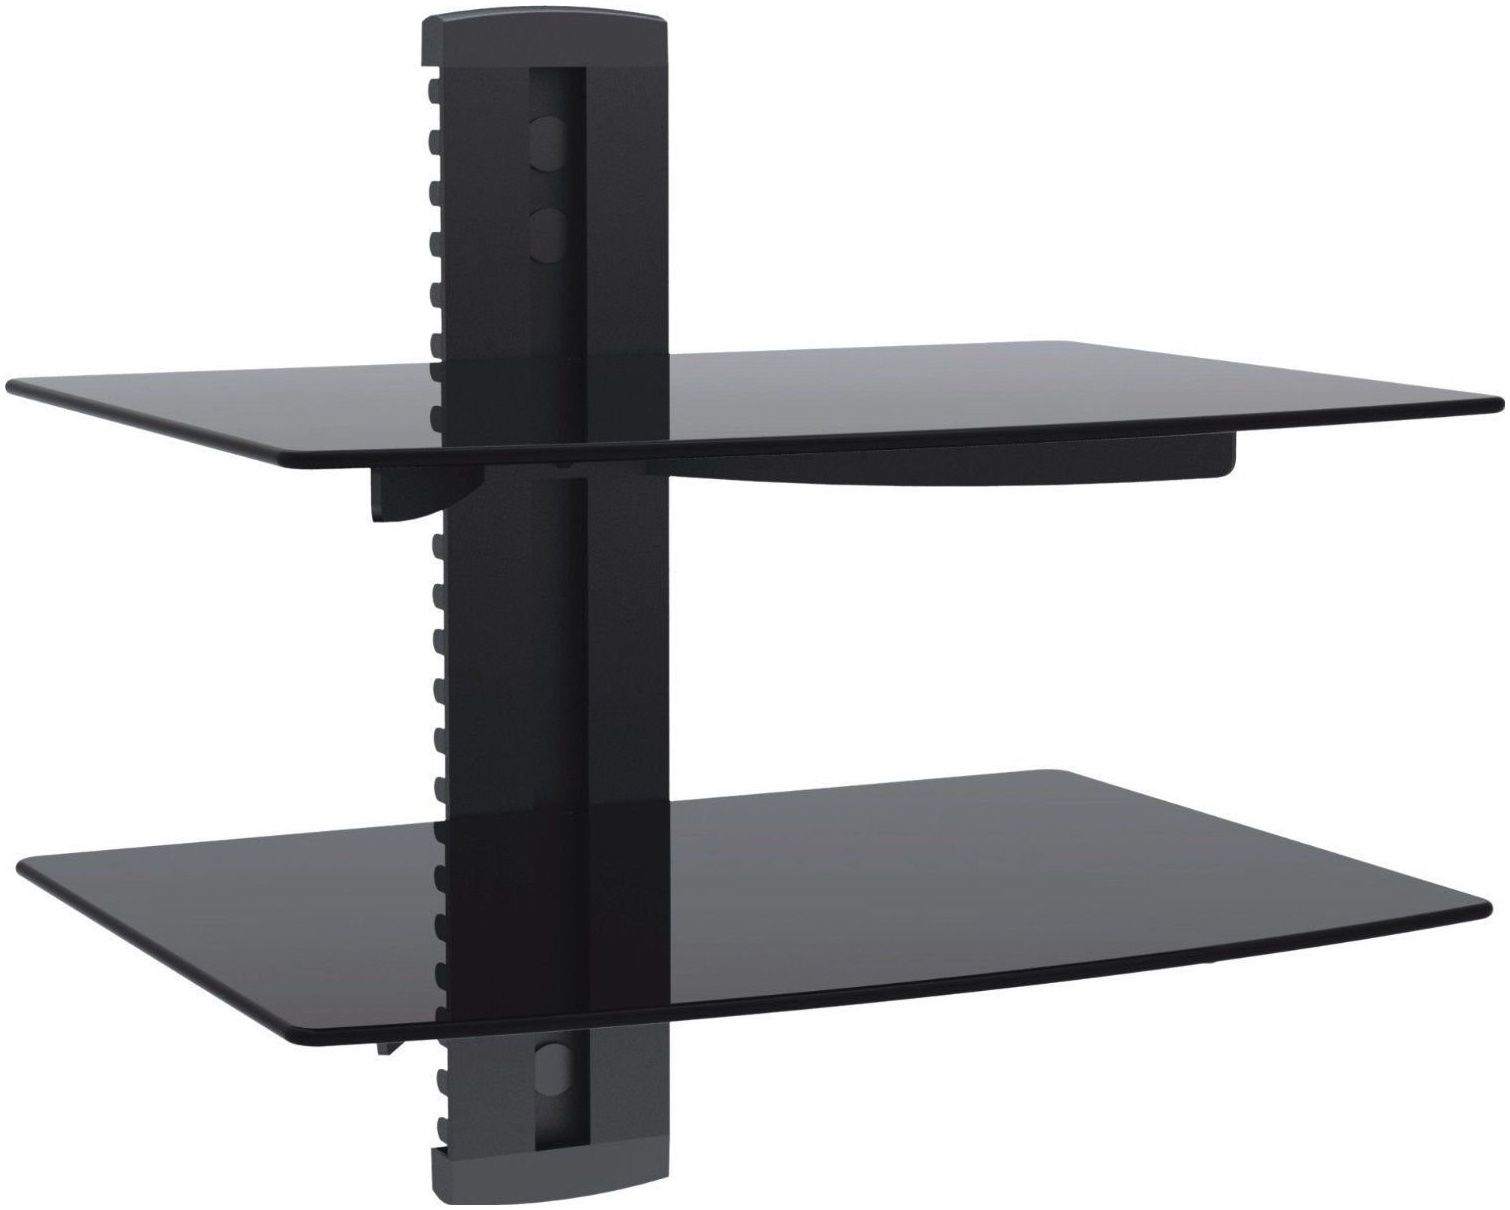 Black Glass Floating Shelves Uk Amazoncom 2xhome Tv Wall Mount With Regard To Floating Black Glass Shelves (View 4 of 12)